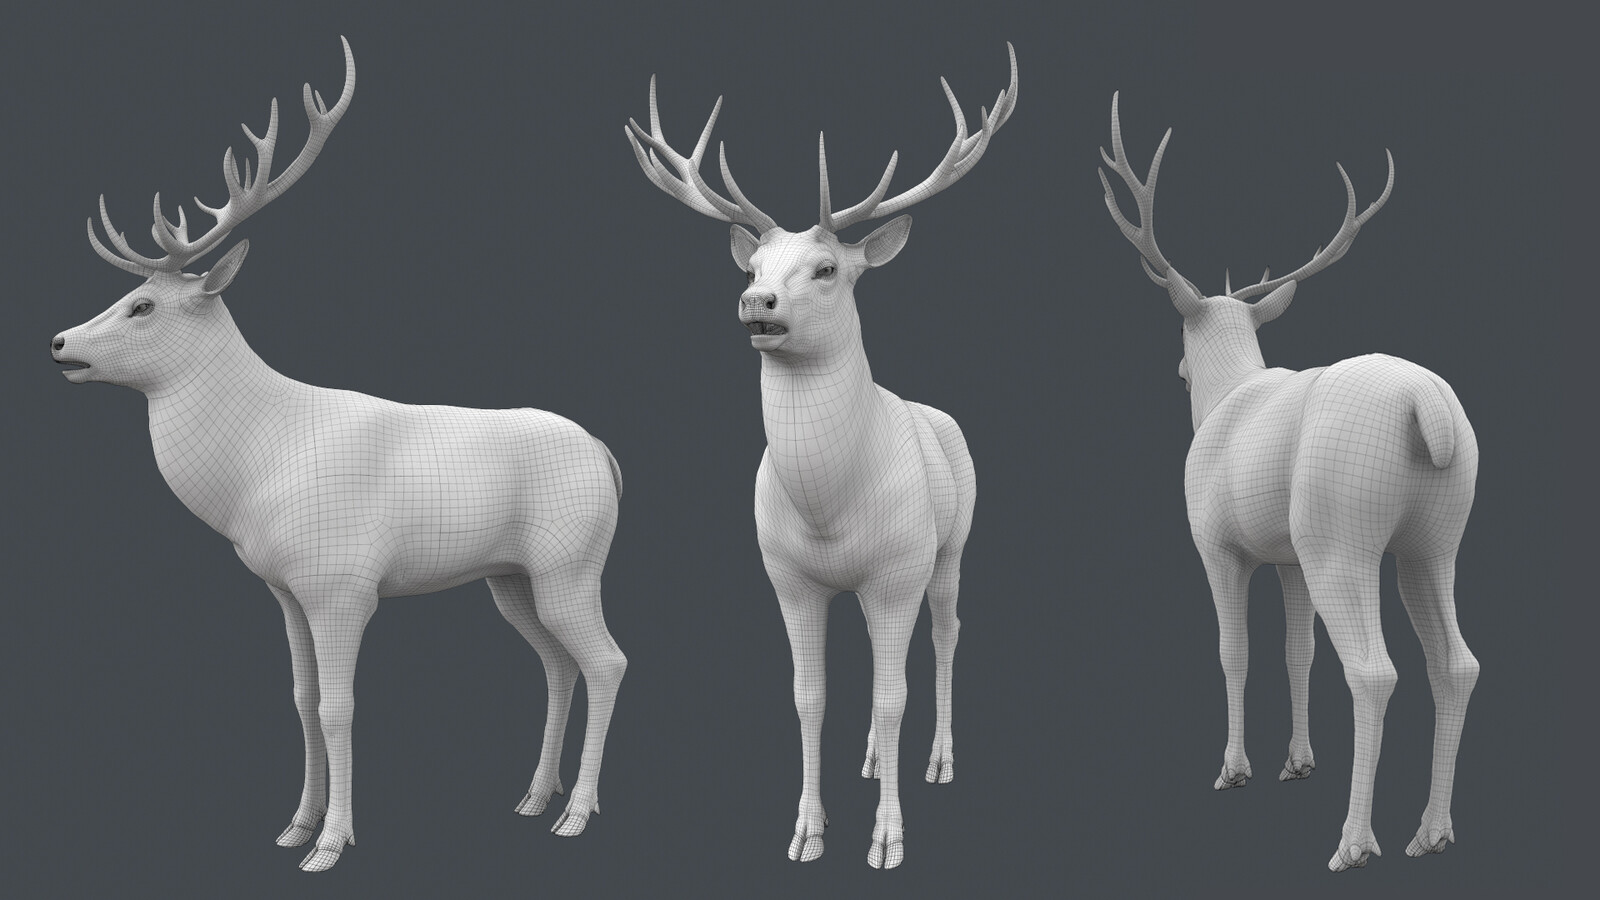 Deer from the film Peter Rabbit (topology).